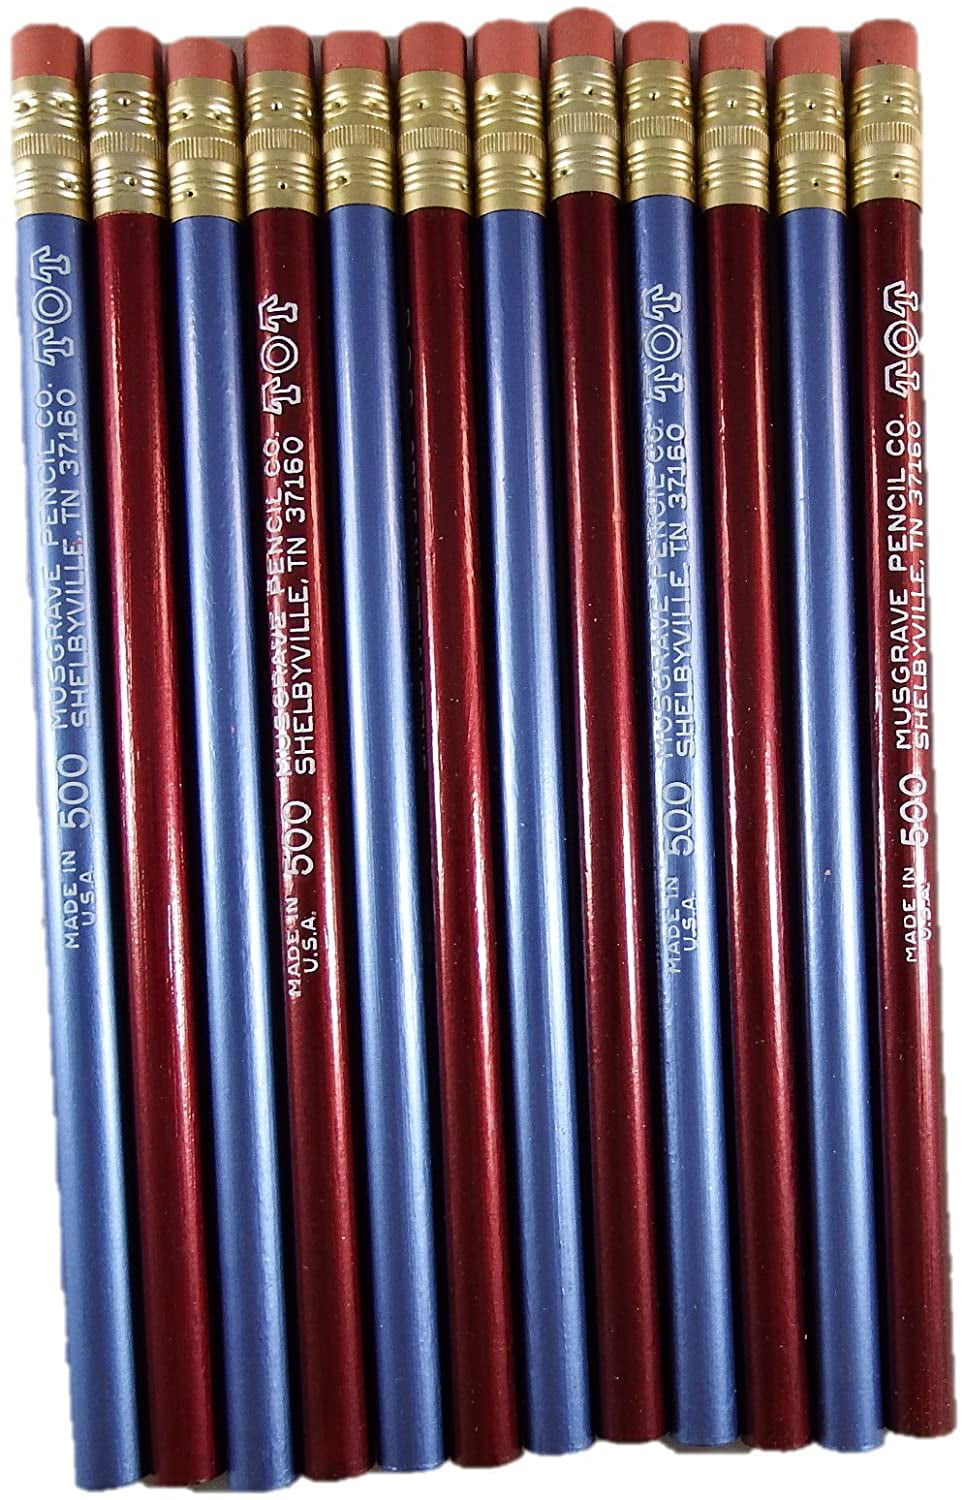 Round Jumbo TOT pencil 10mm Metallic Blue and Red Med Soft Core Package of 12 